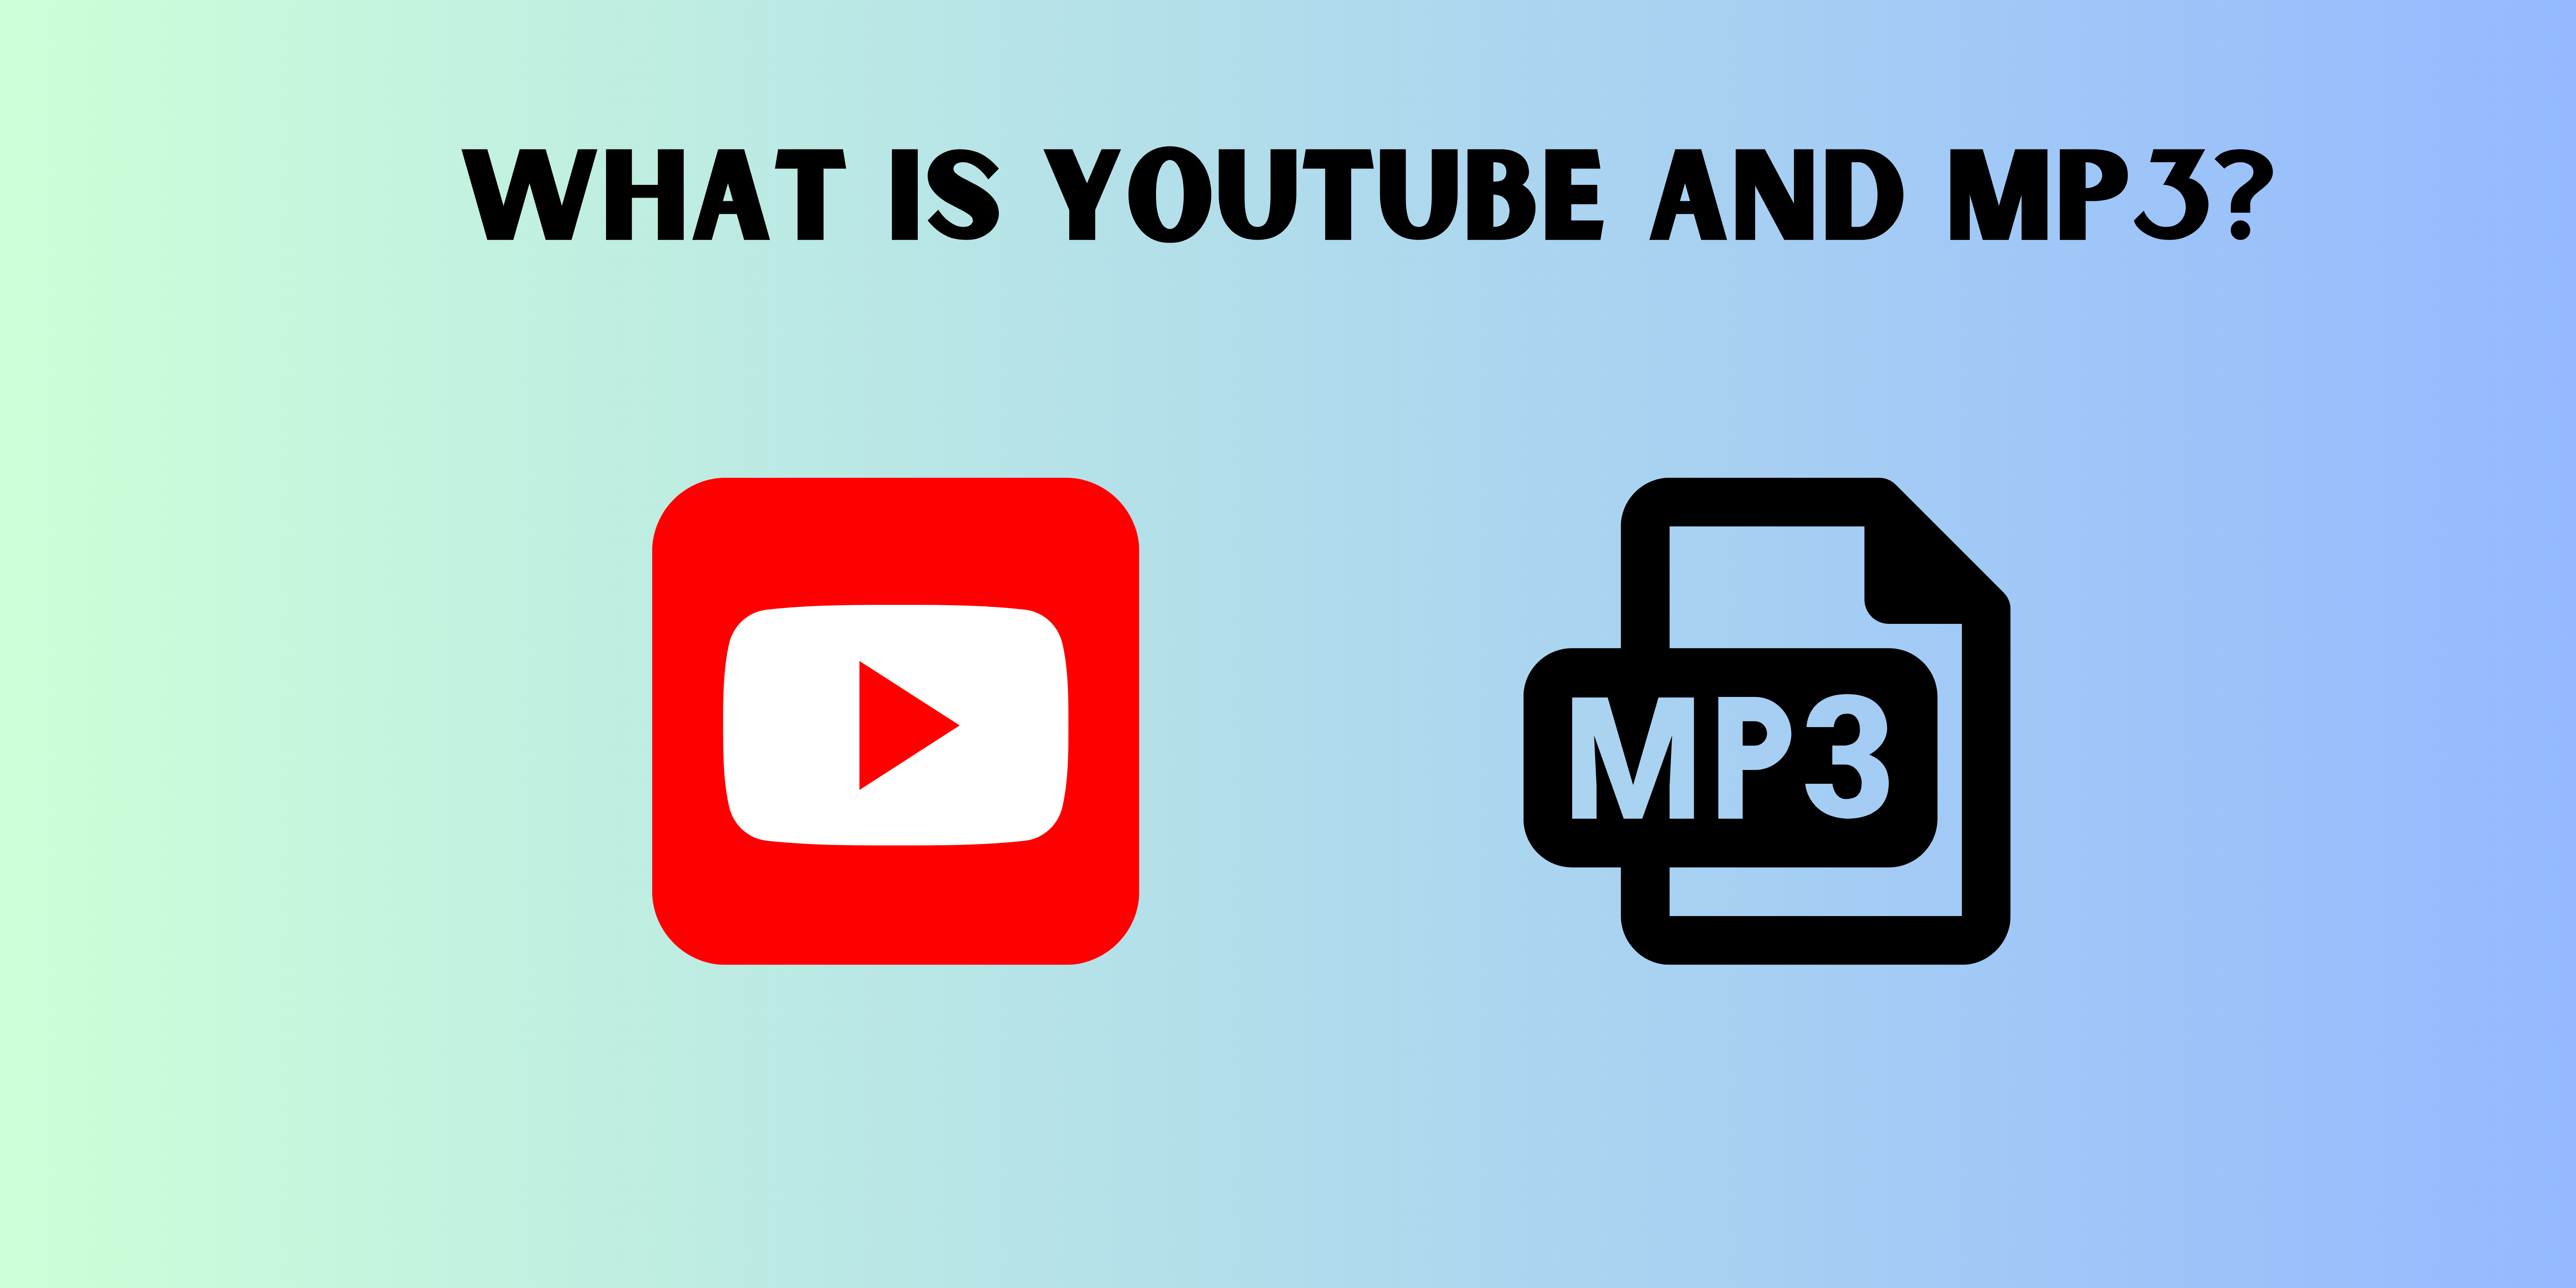 YouTube and MP3